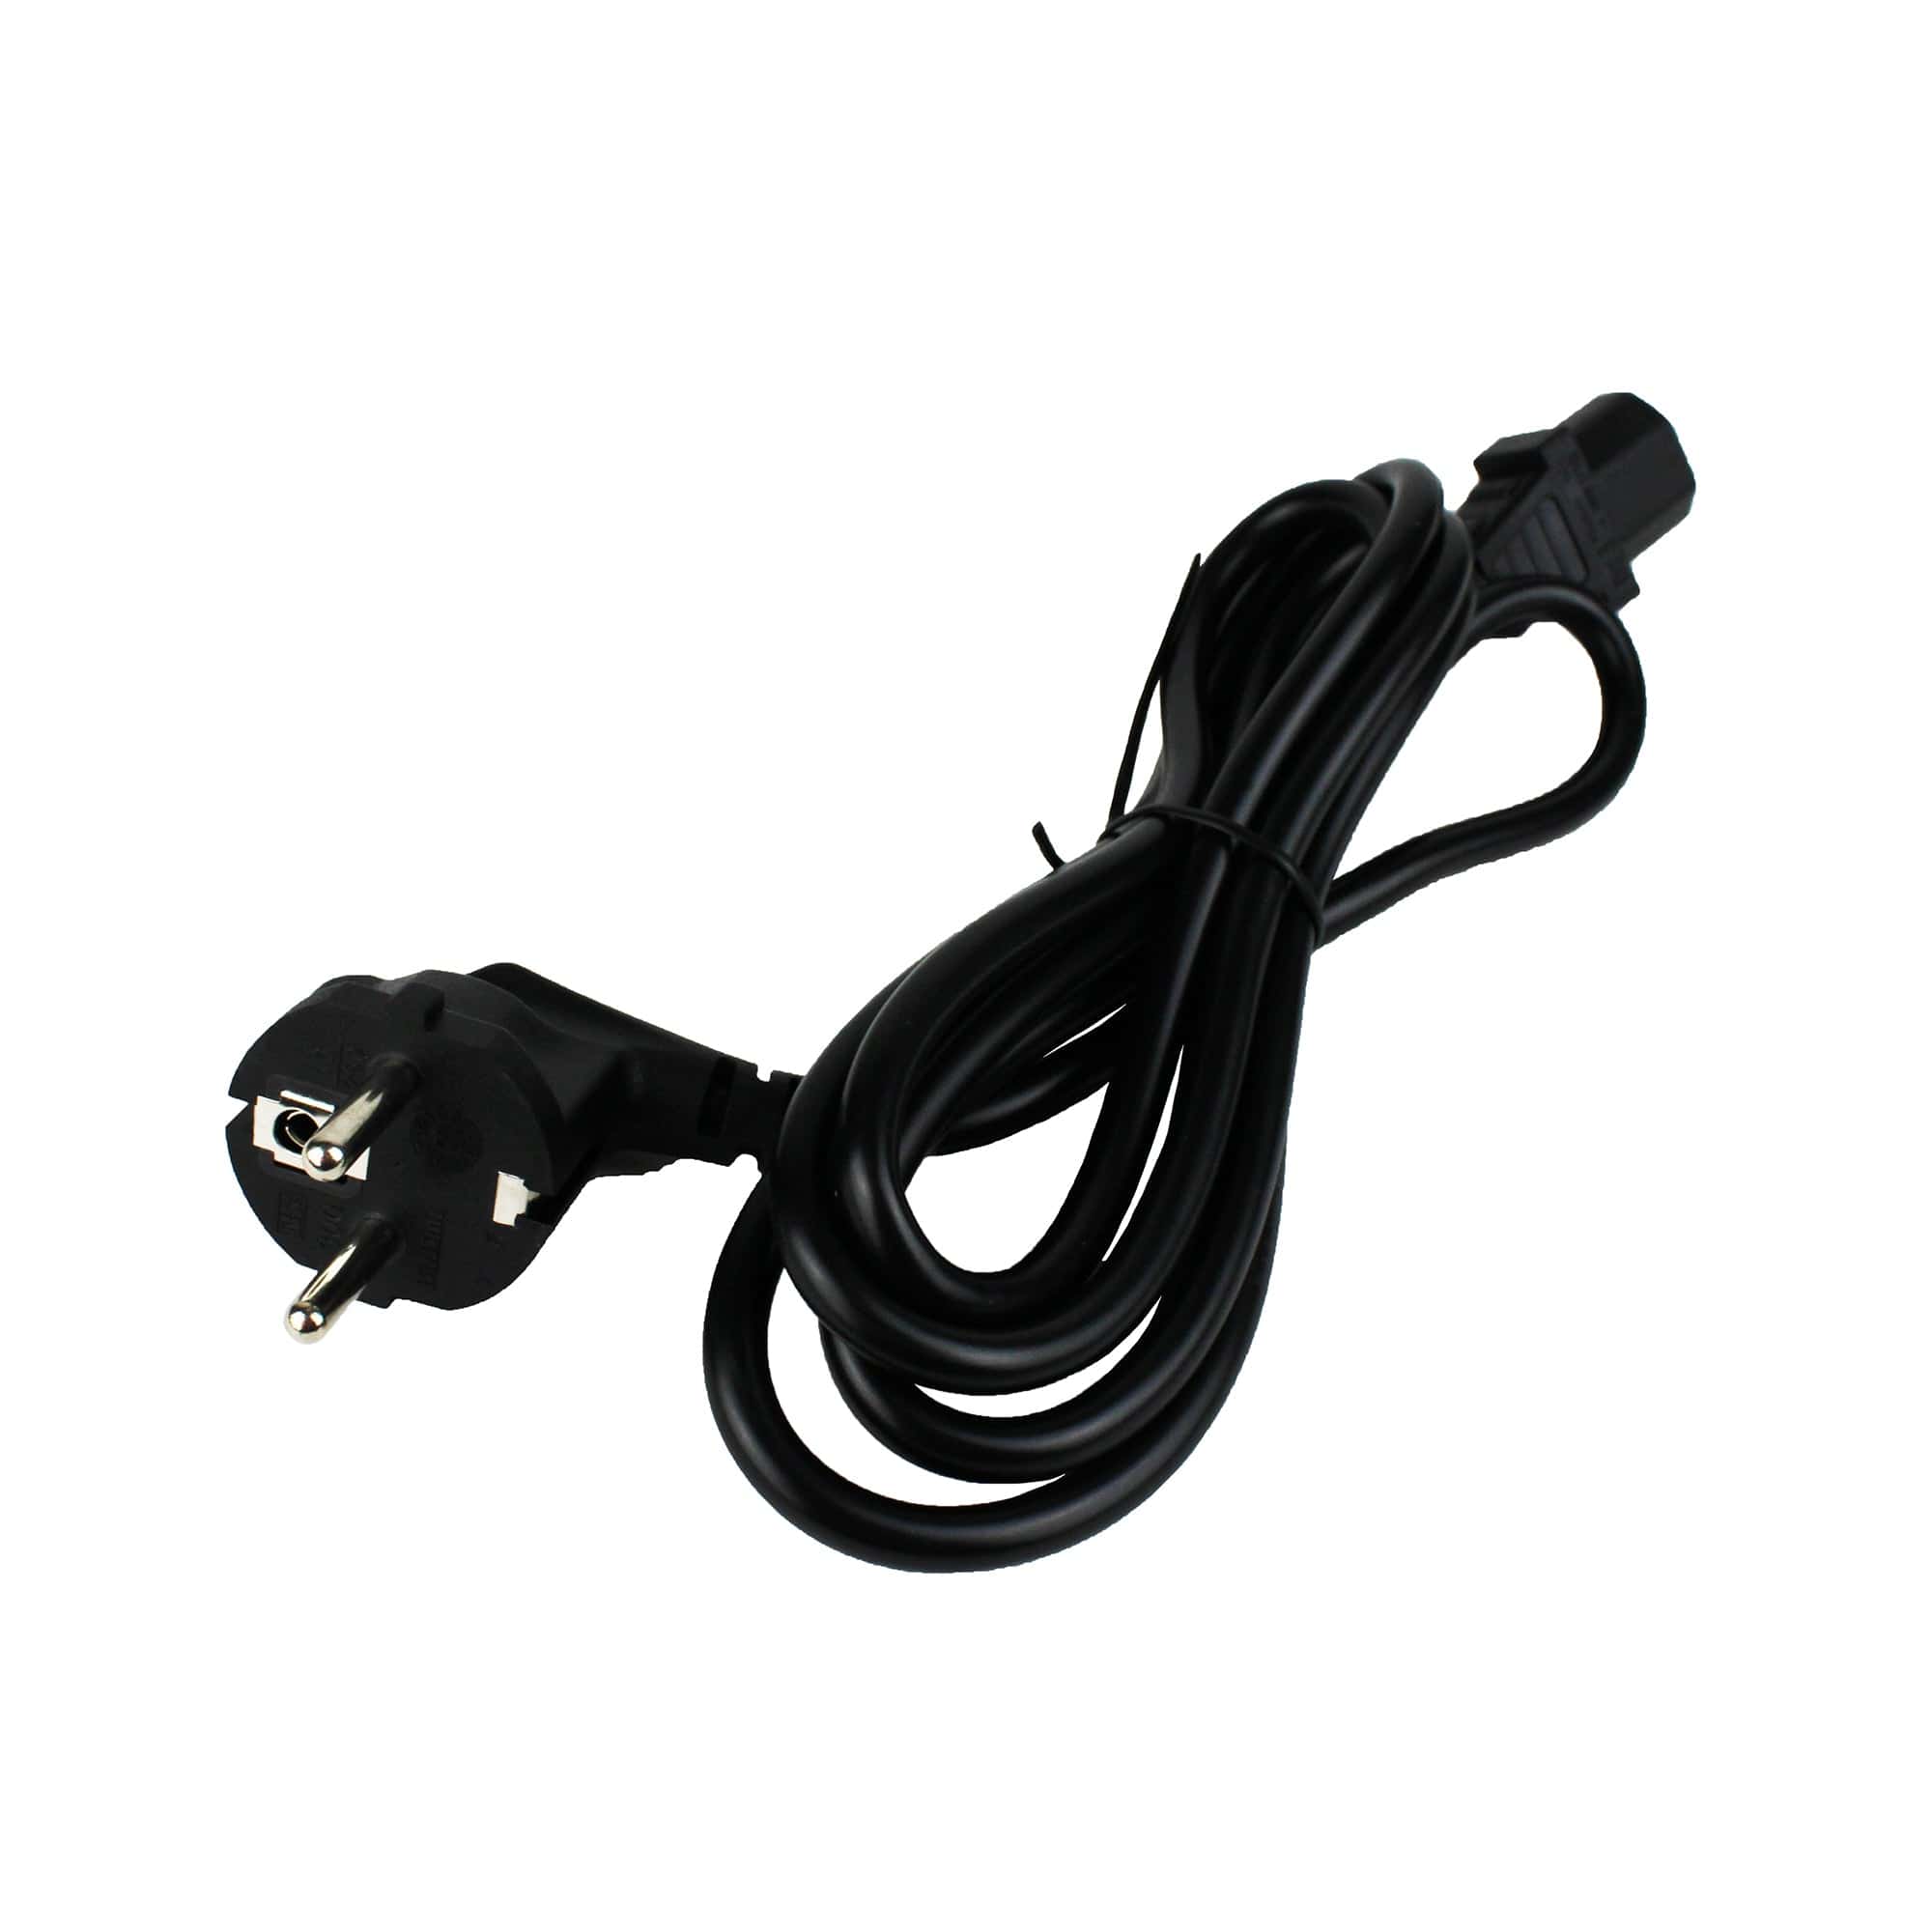 Dometic 4450002204 6' AC Power Cord for Select Dometic Refrigerator/Freezers